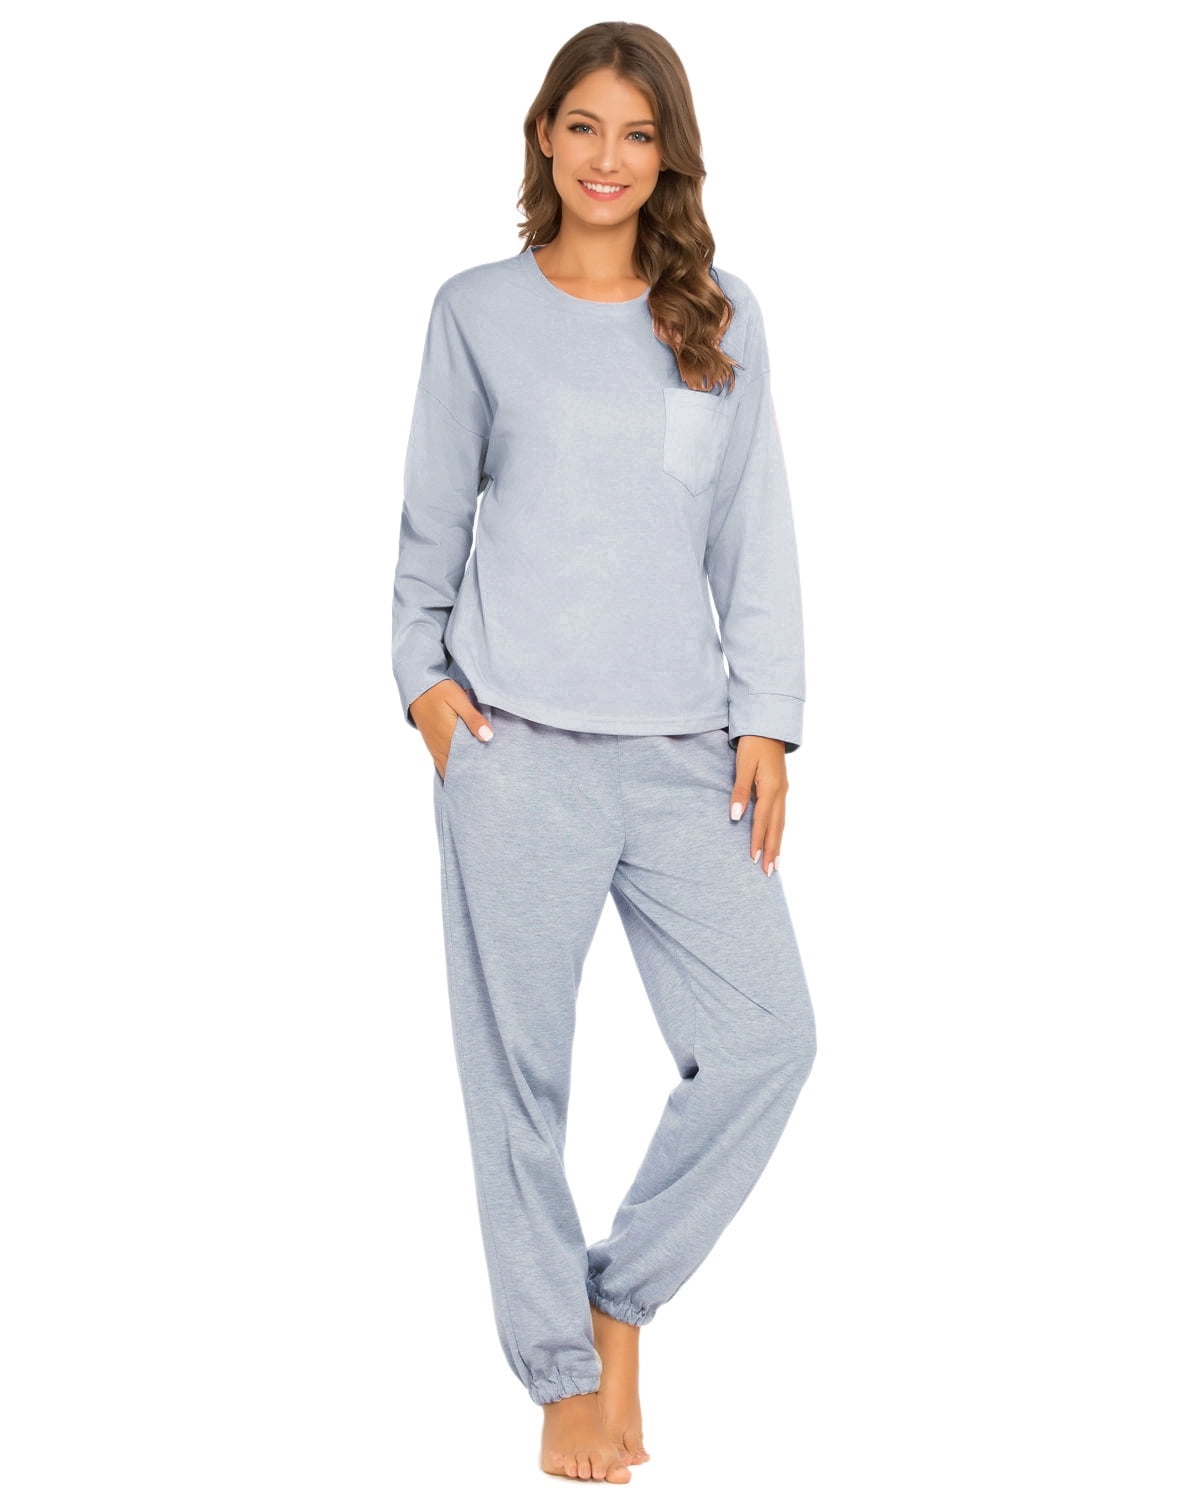 MintLimit Women's Solid Pajamas Sets Long Sleeve Tops and Jogging Pants ...